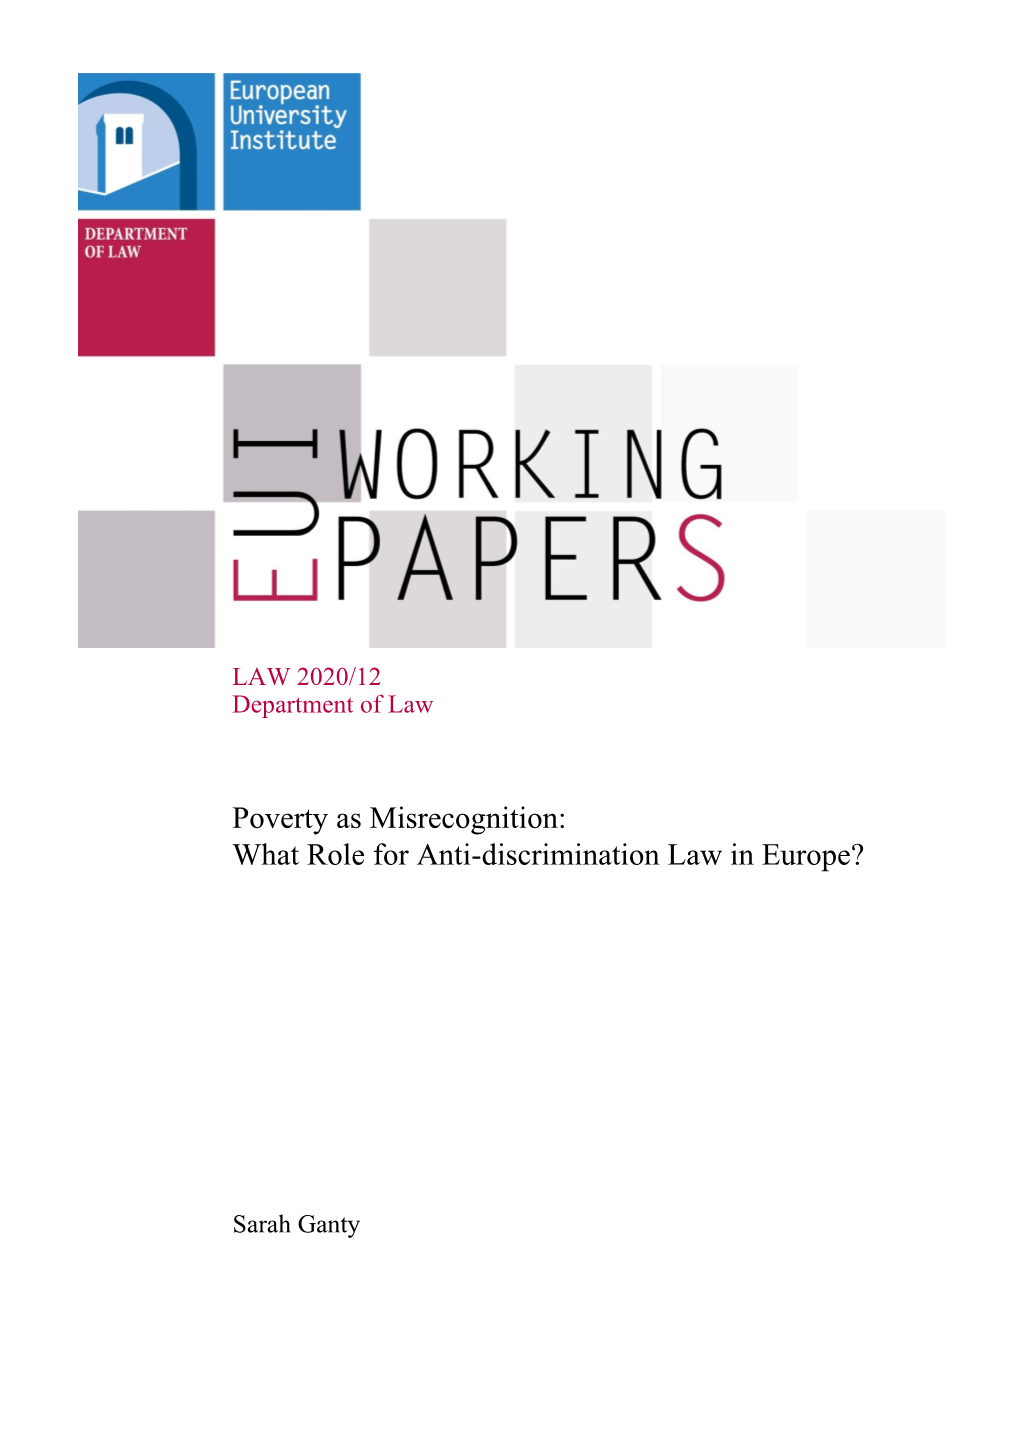 Poverty As Misrecognition: What Role for Anti-Discrimination Law in Europe?